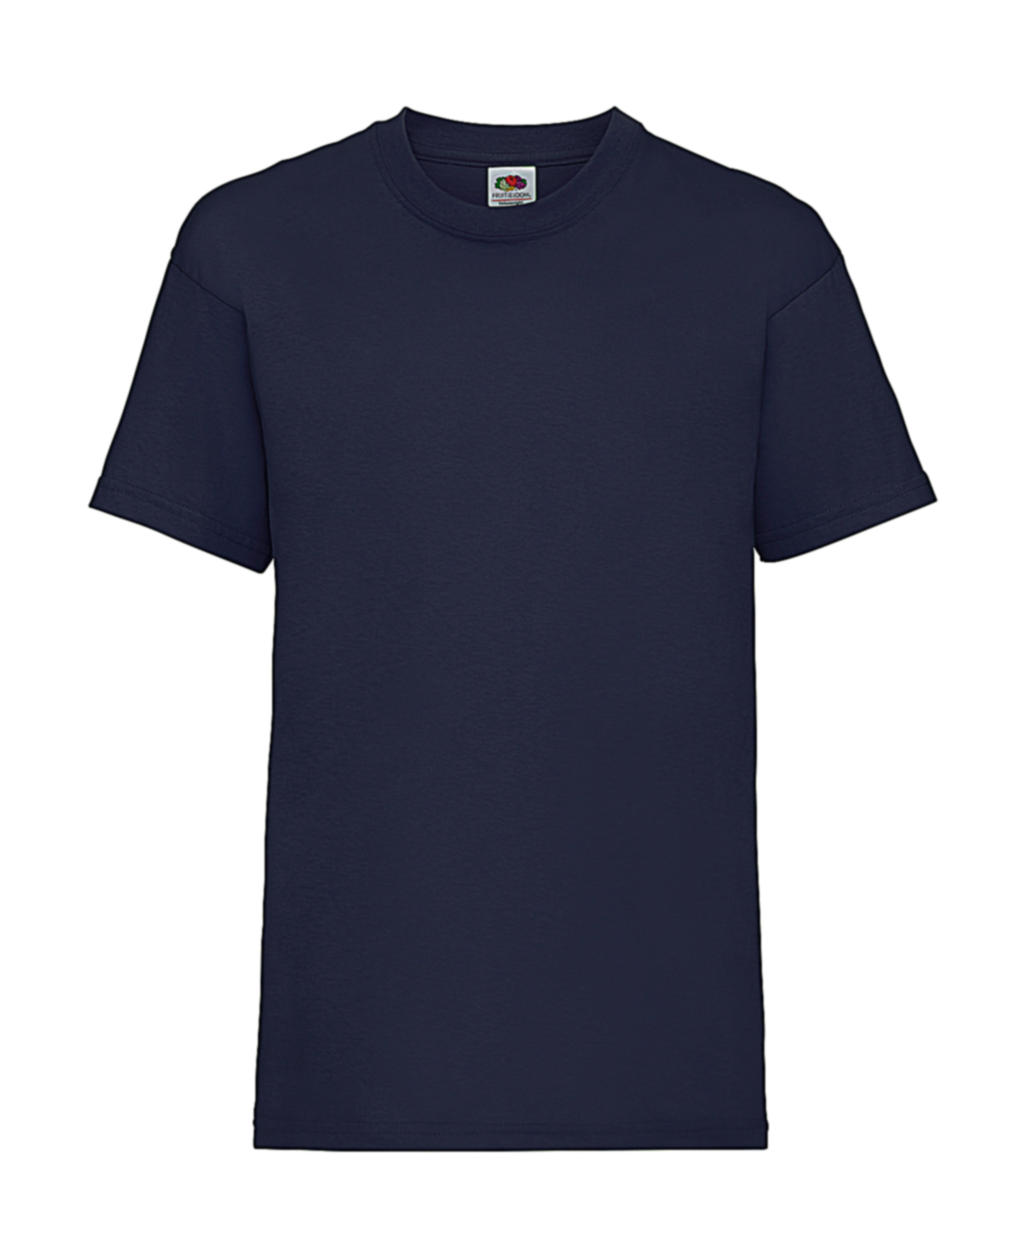  Kids Valueweight T in Farbe Navy